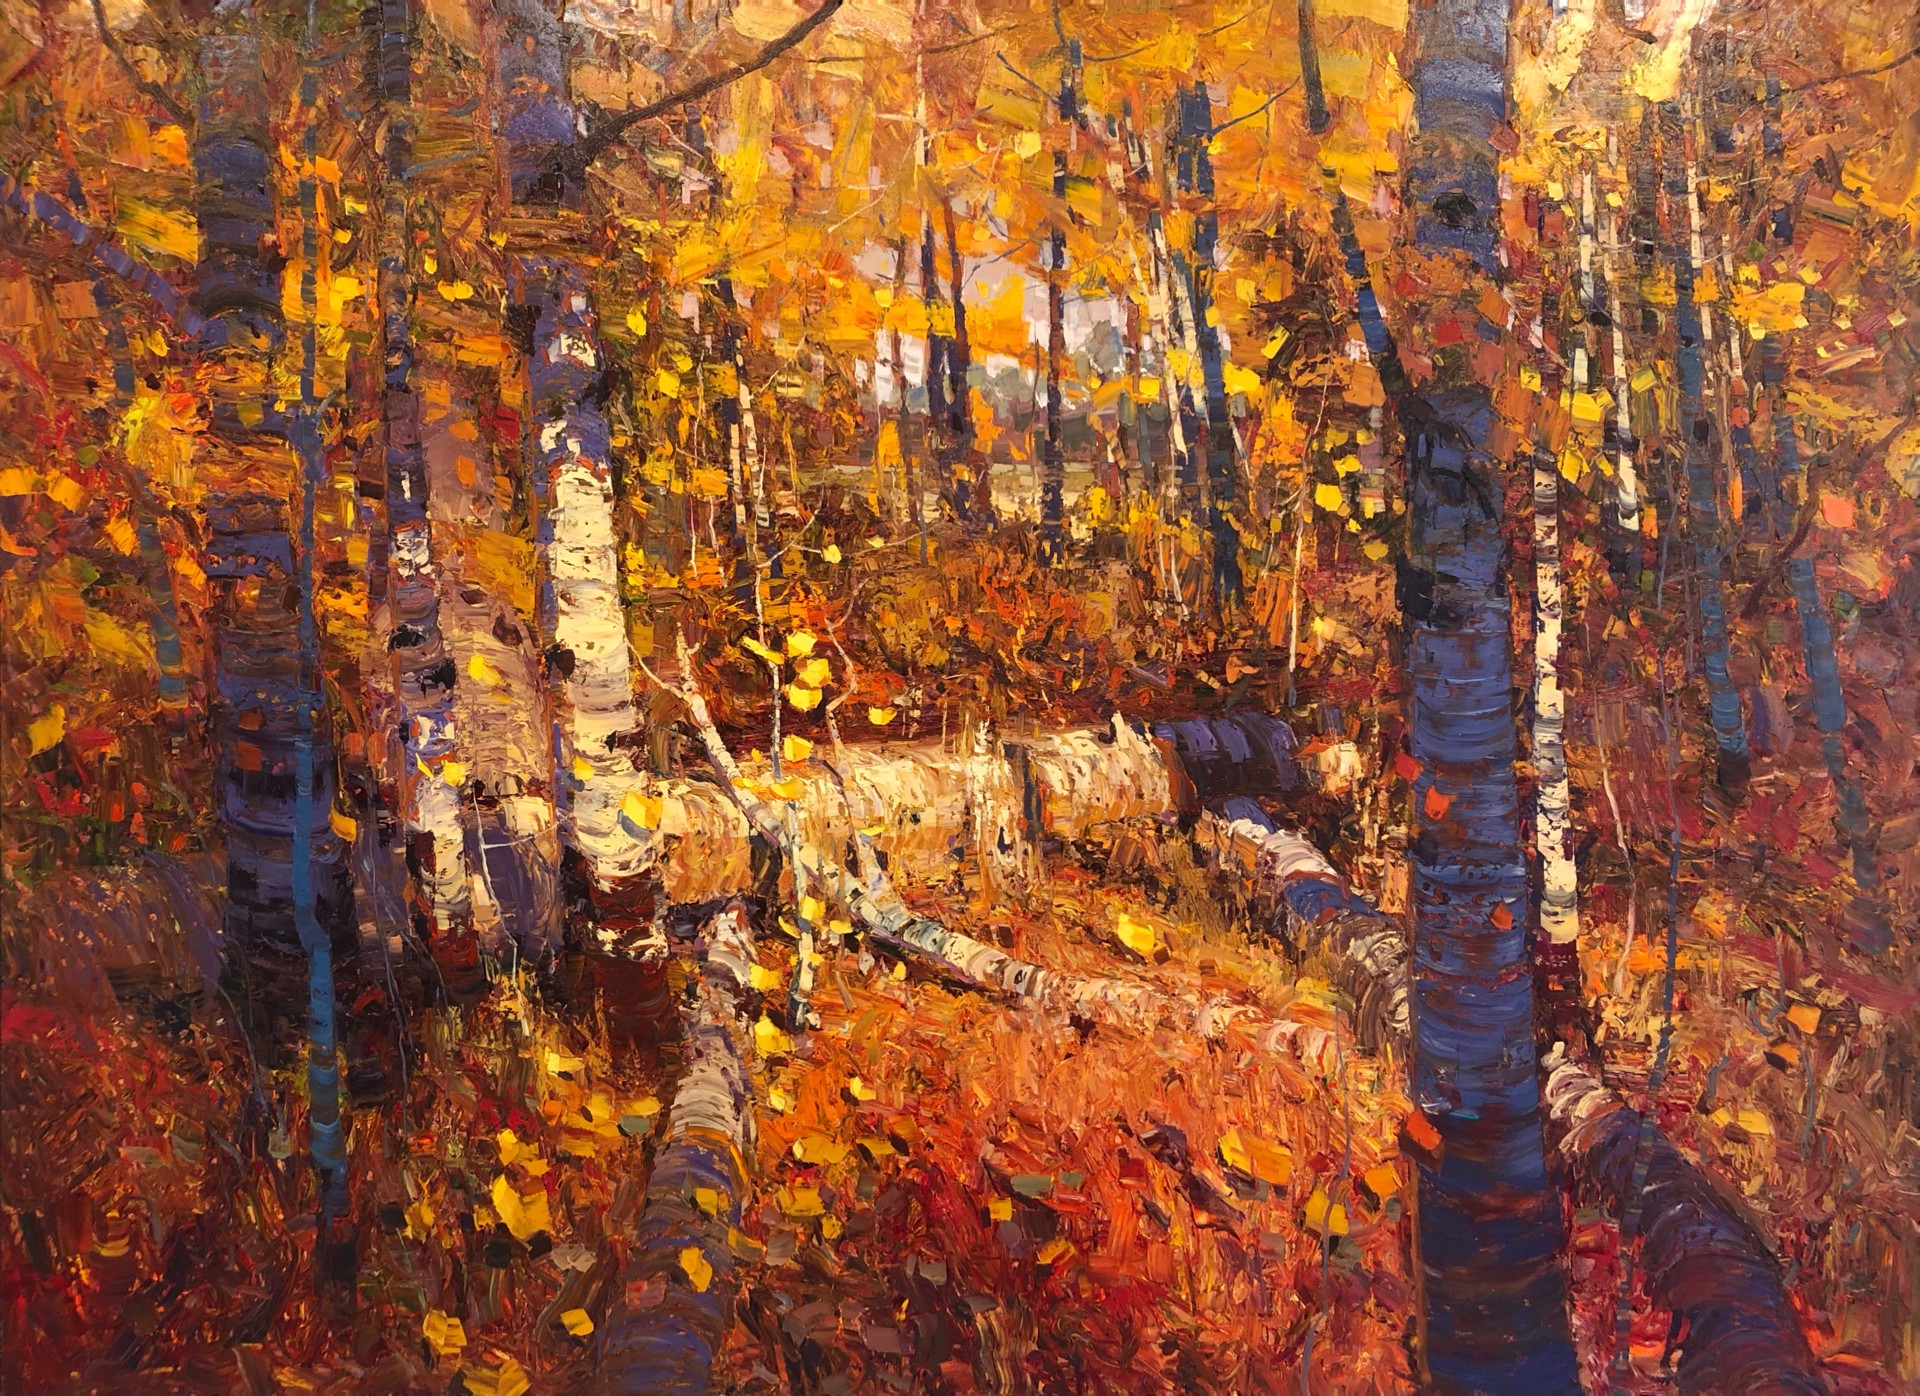 A Palette Knife Oil Painting Of Fall Aspens In A Dense Forest By Silas Thompson At Gallery Wild